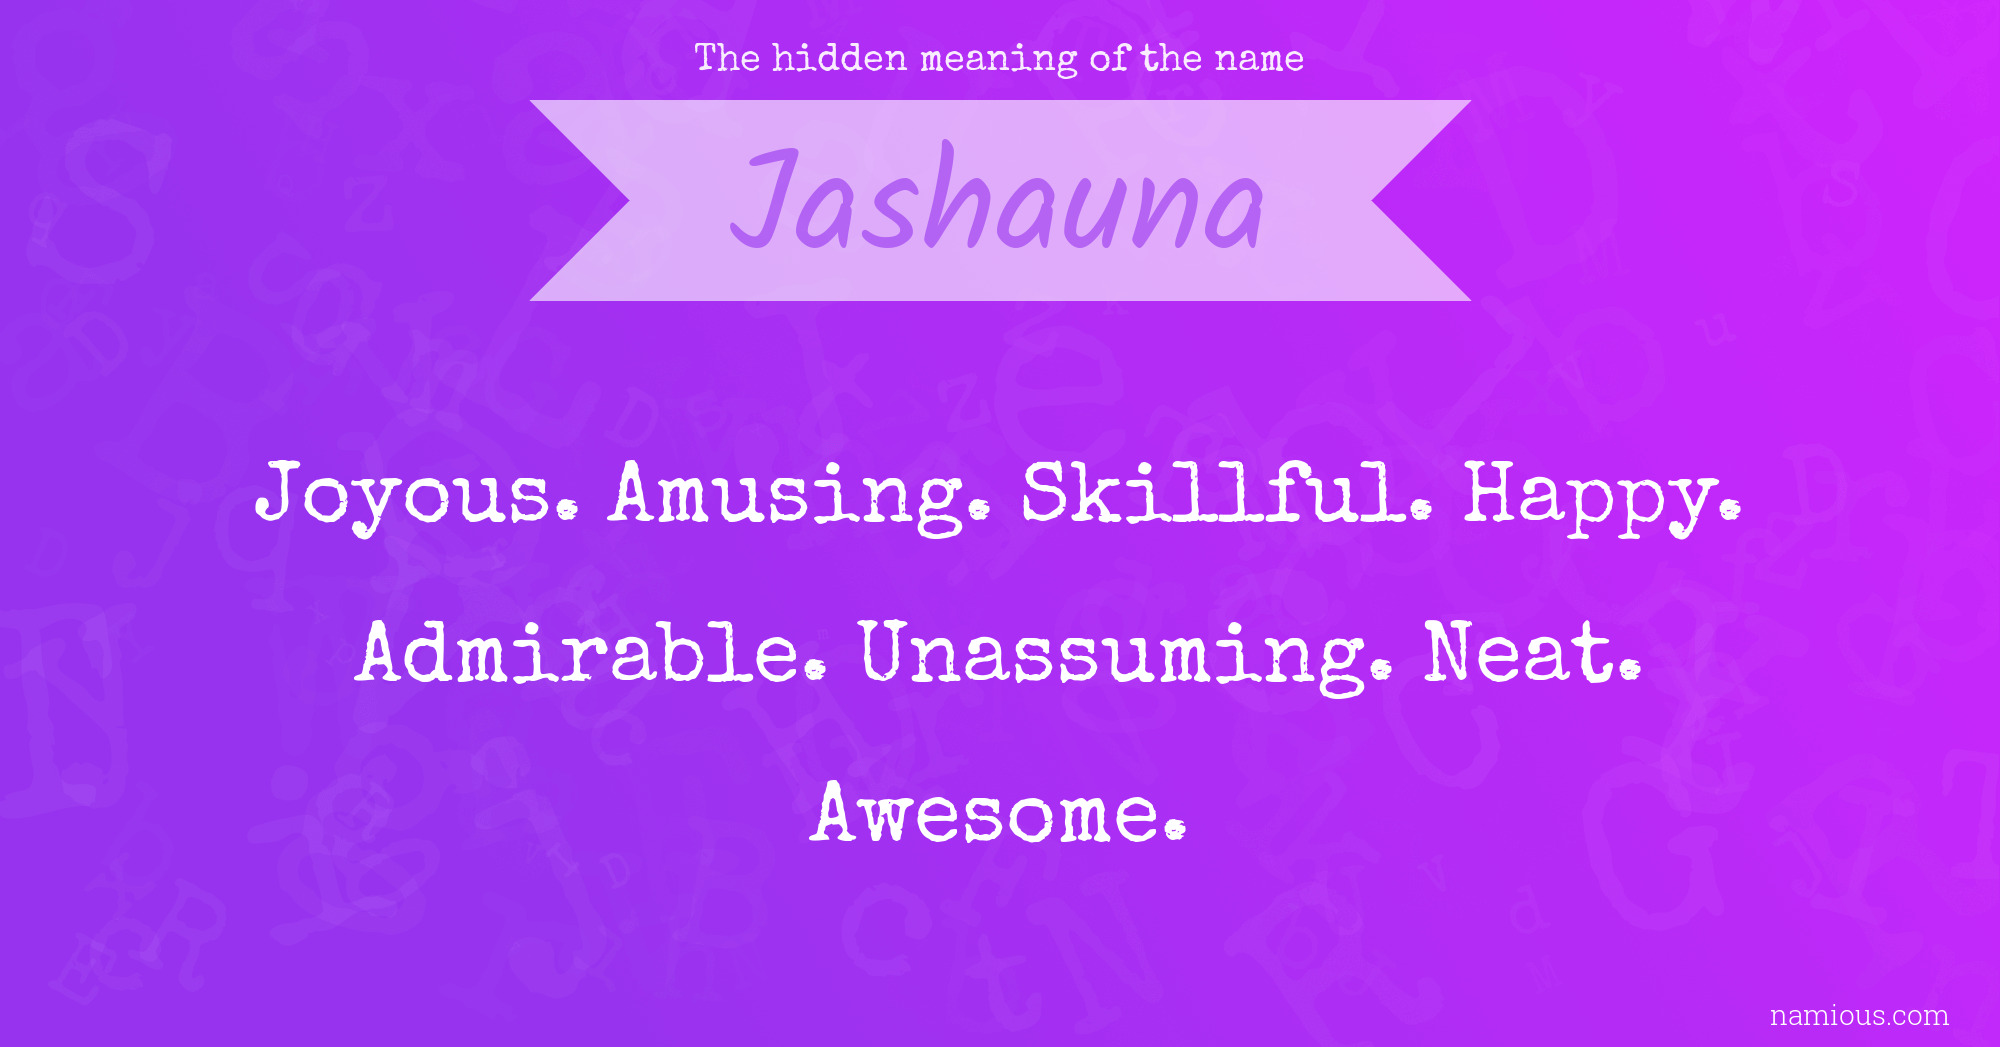 The hidden meaning of the name Jashauna